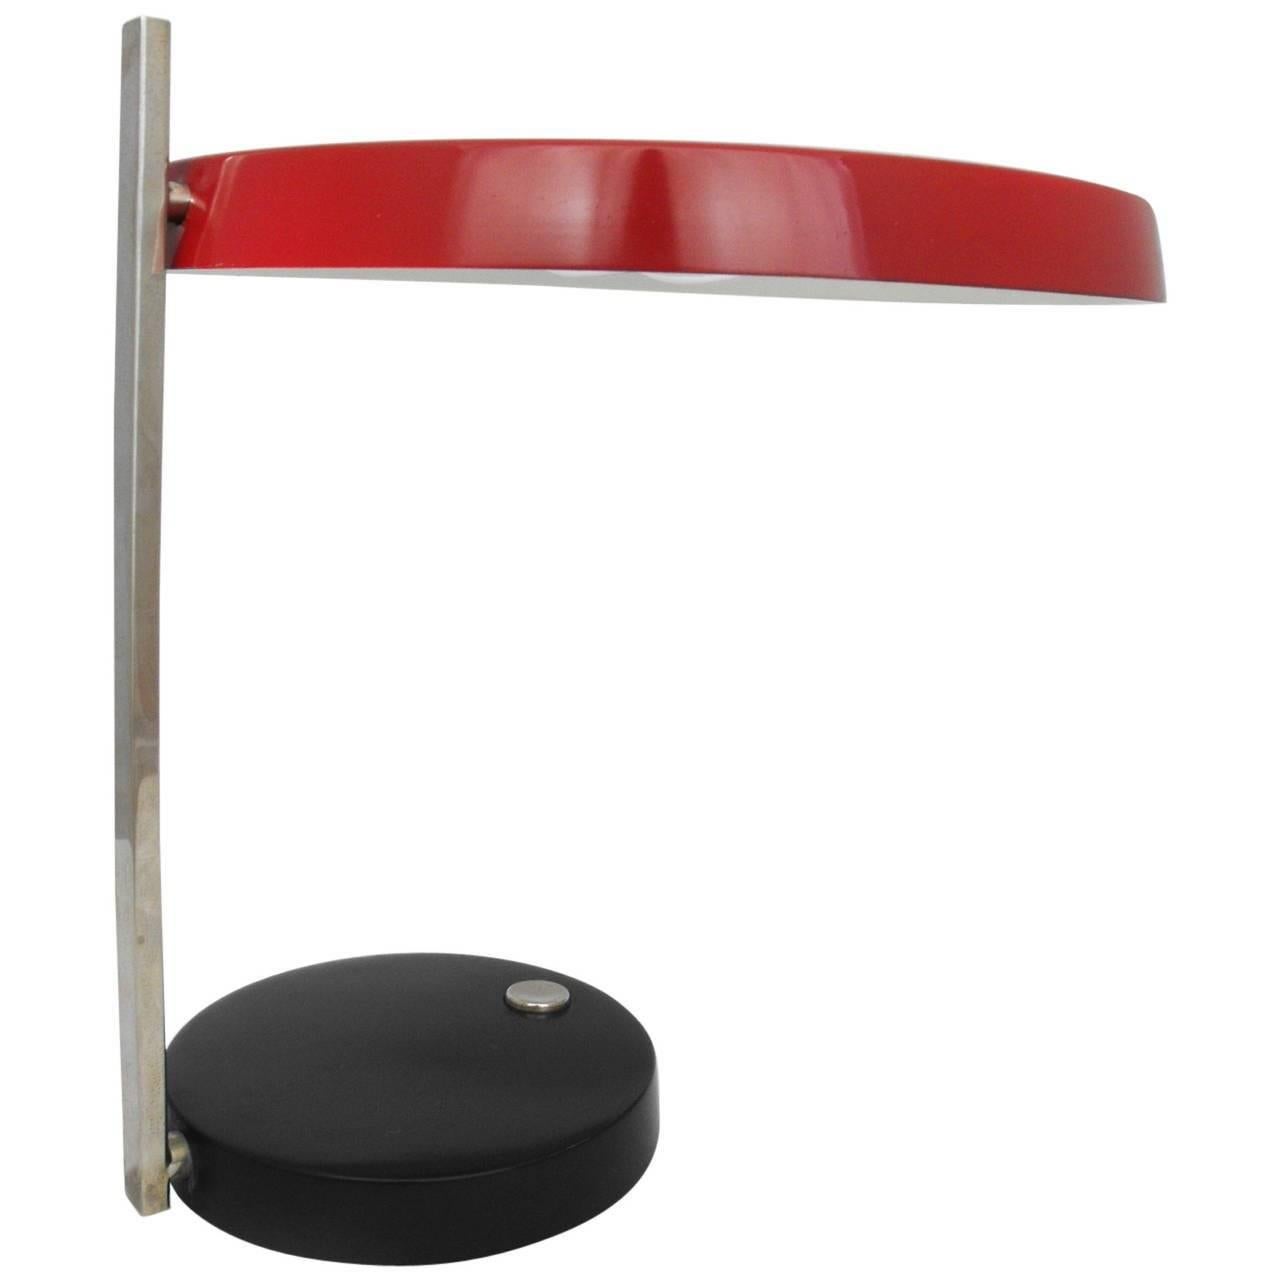 Oslo Midcentury Red Chrome and Black Desk Lamp by Heinz Pfaender, 1962 For Sale